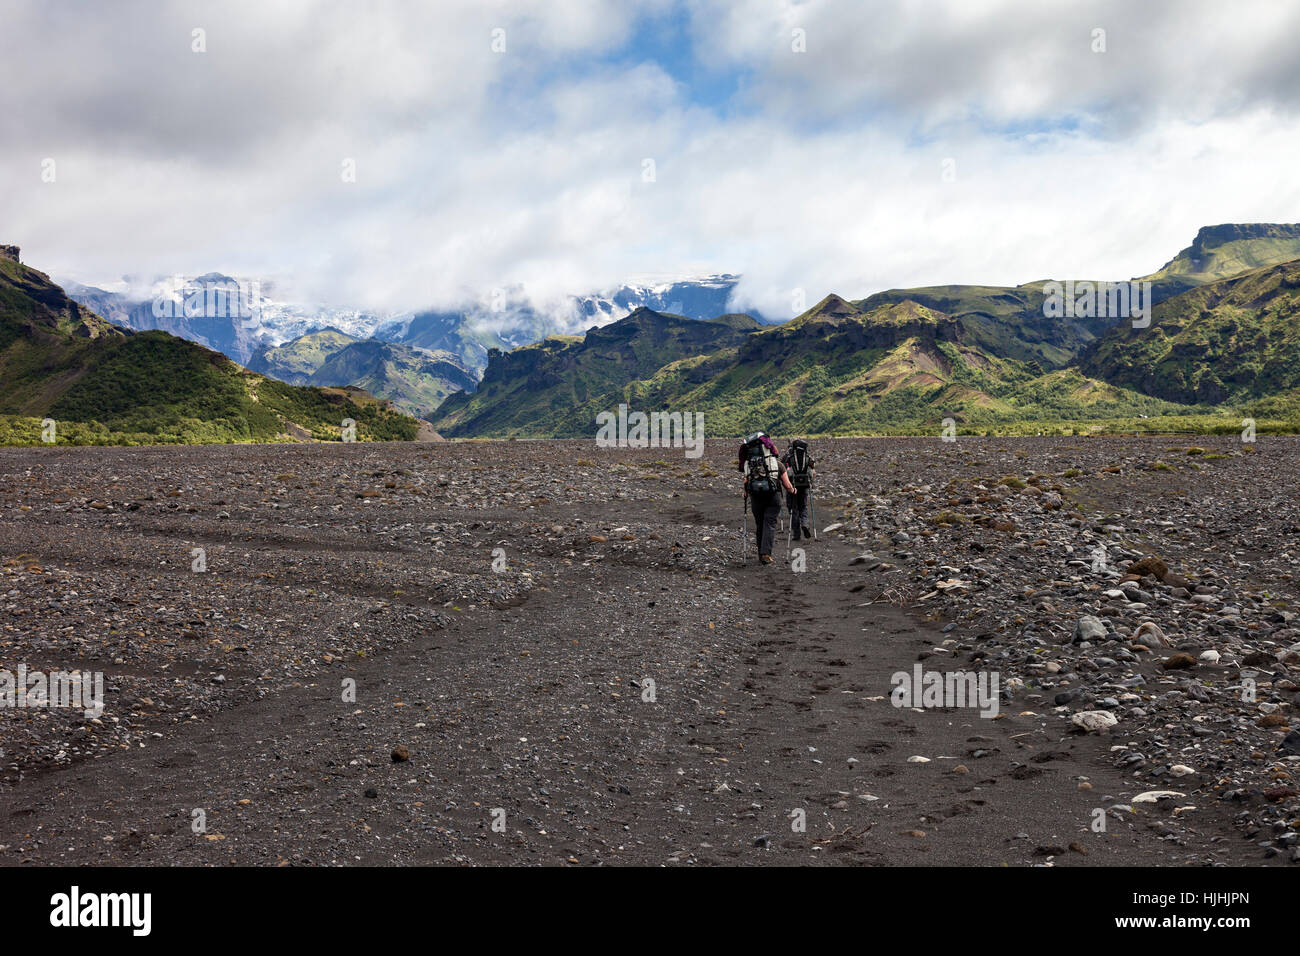 Hikers Crossing the Krossa River Flood Plain with the Myrdalsjokull Icecap Ahead, Under which Sits the Katla Volcano, Iceland Stock Photo